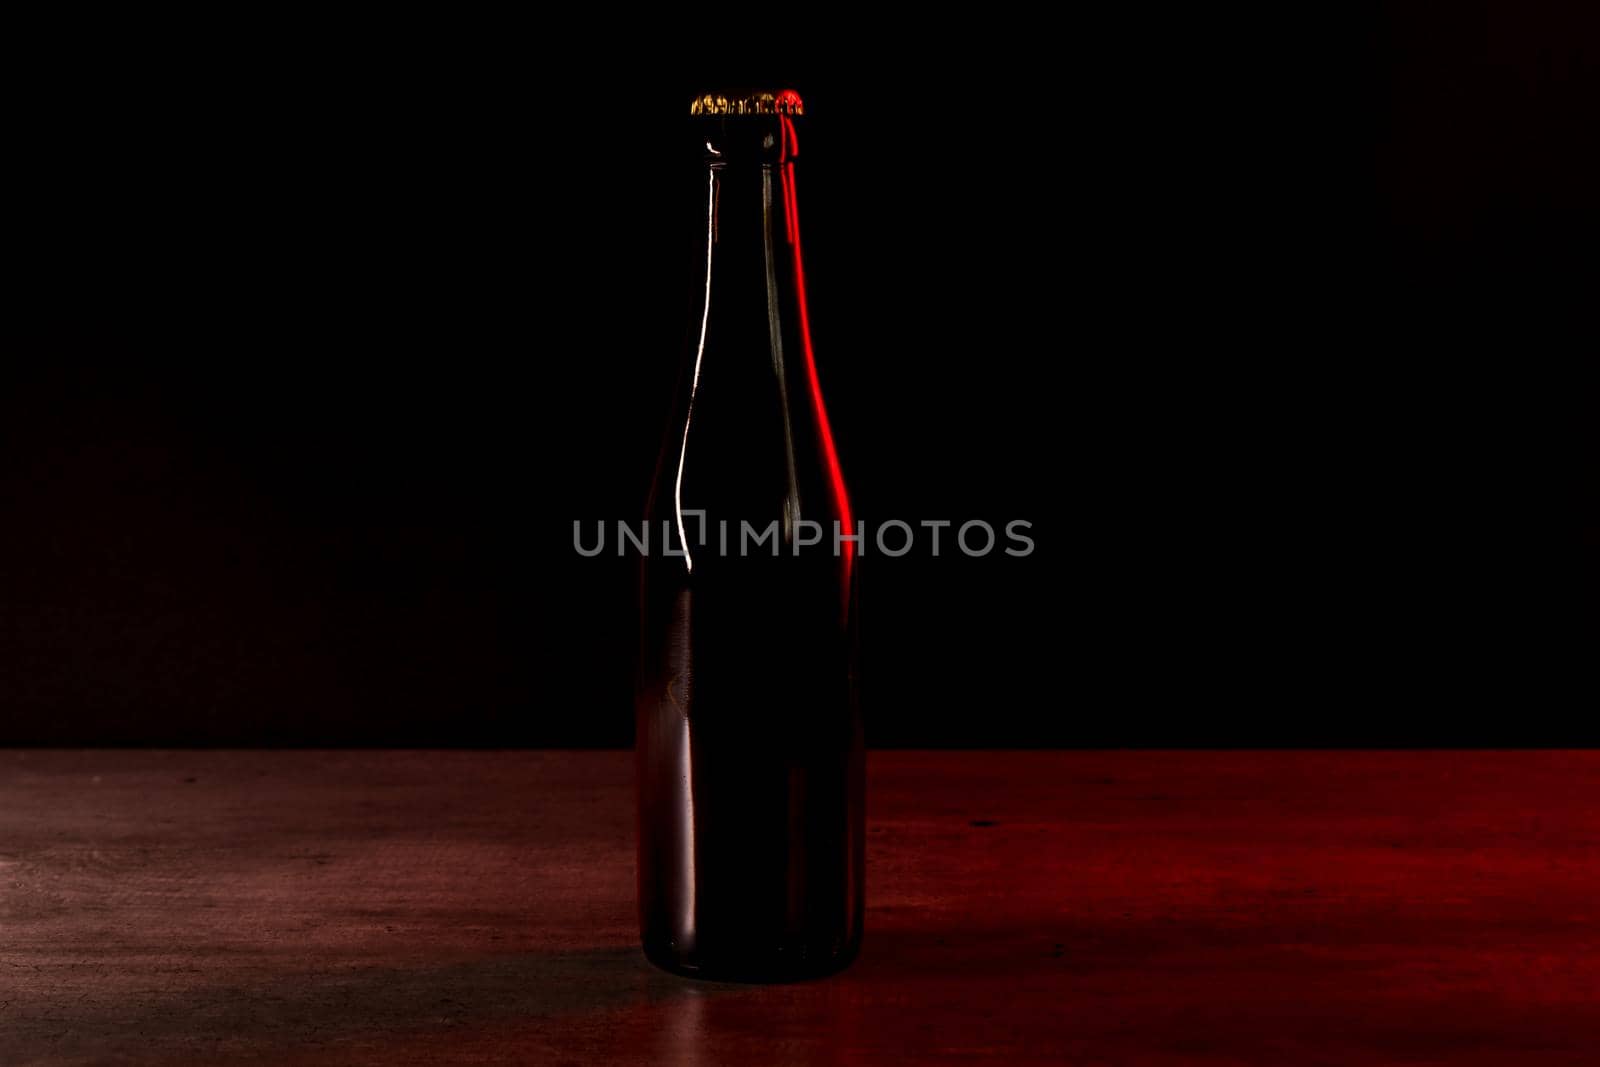 silhouette of a beer bottle on a black background with red and orange lights